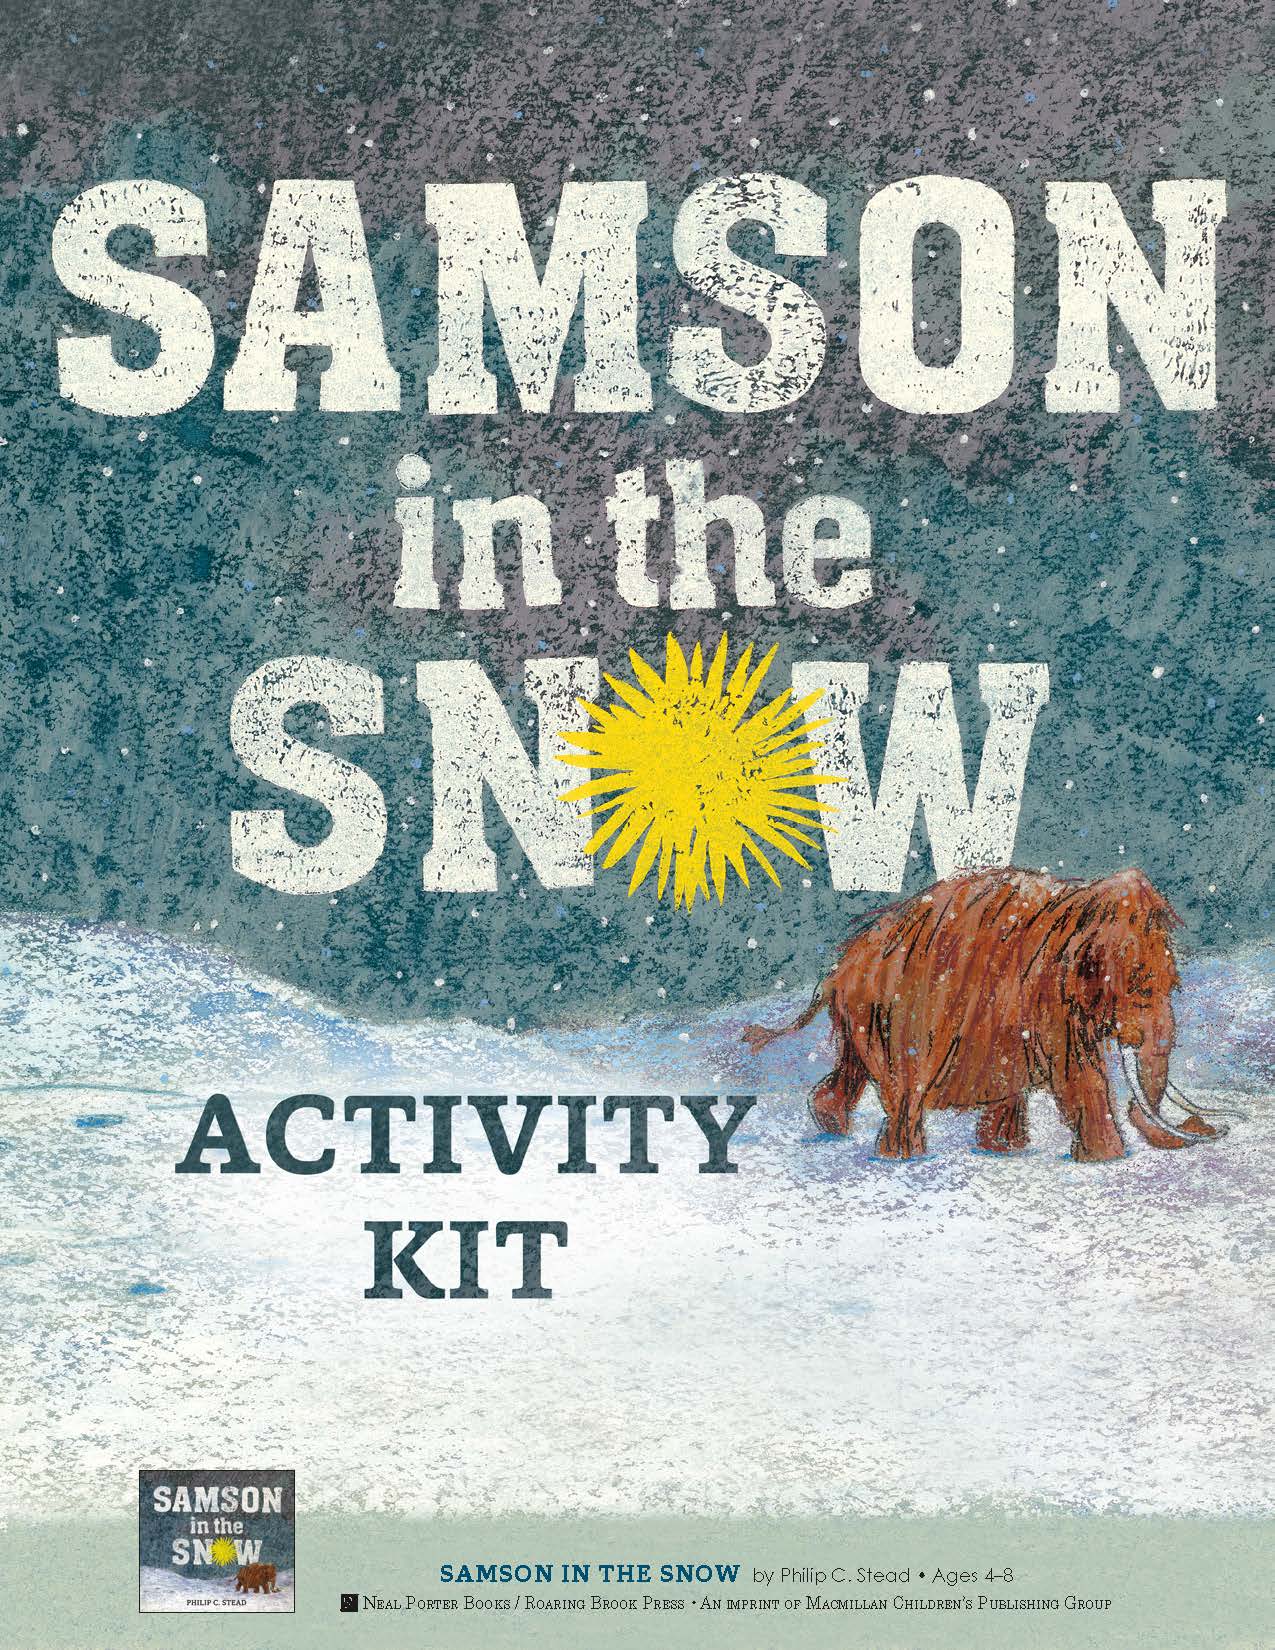 pages-from-samson-in-the-snow-activity-kit-1